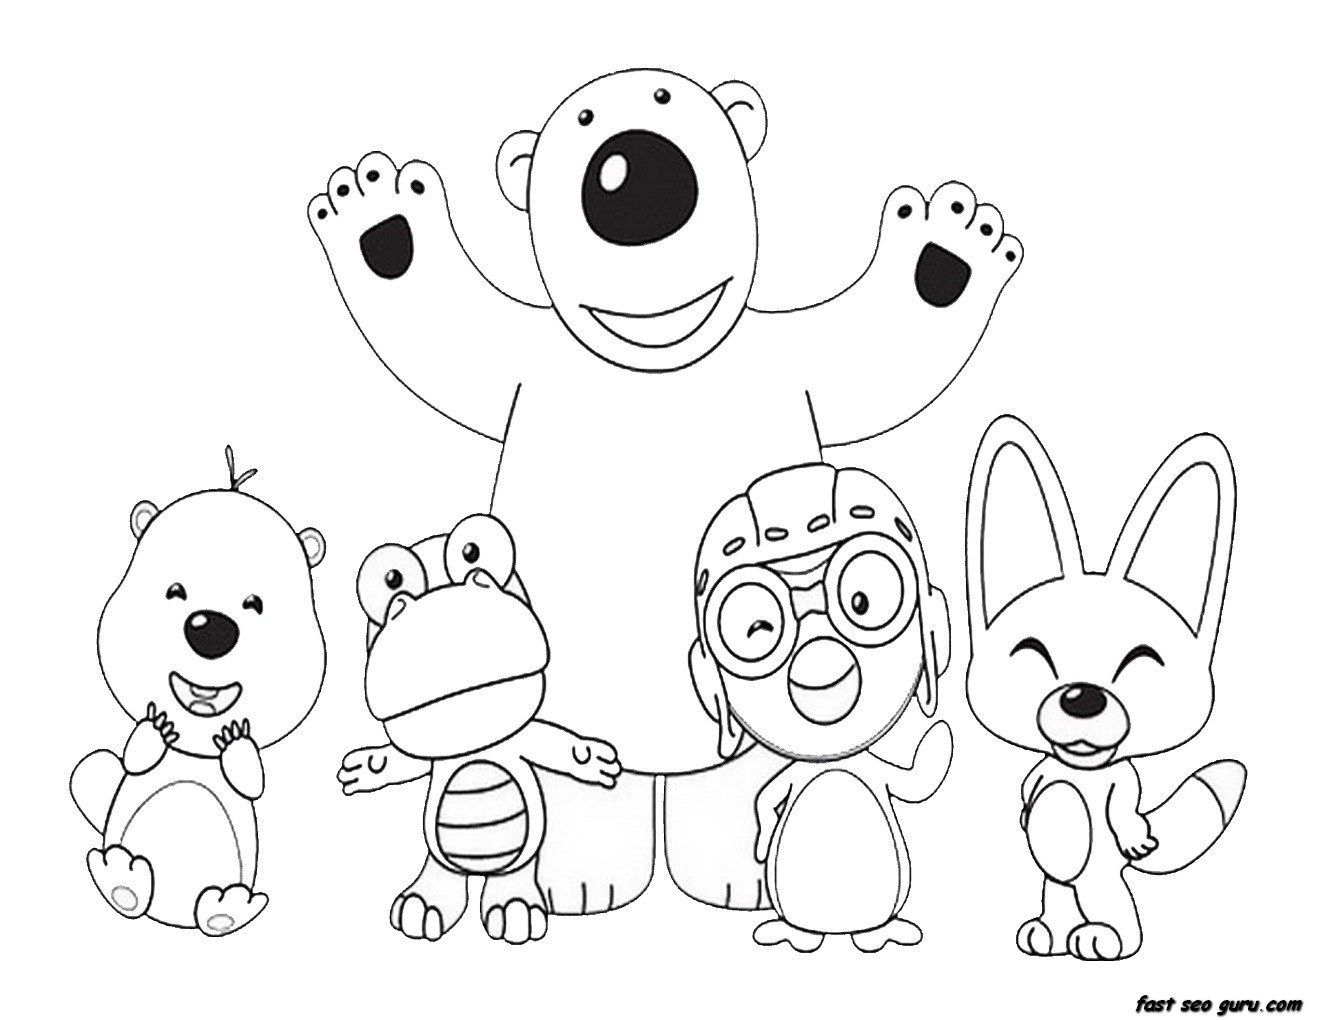 Printable Disney Pororo the Little Penguin and Friends coloring pages